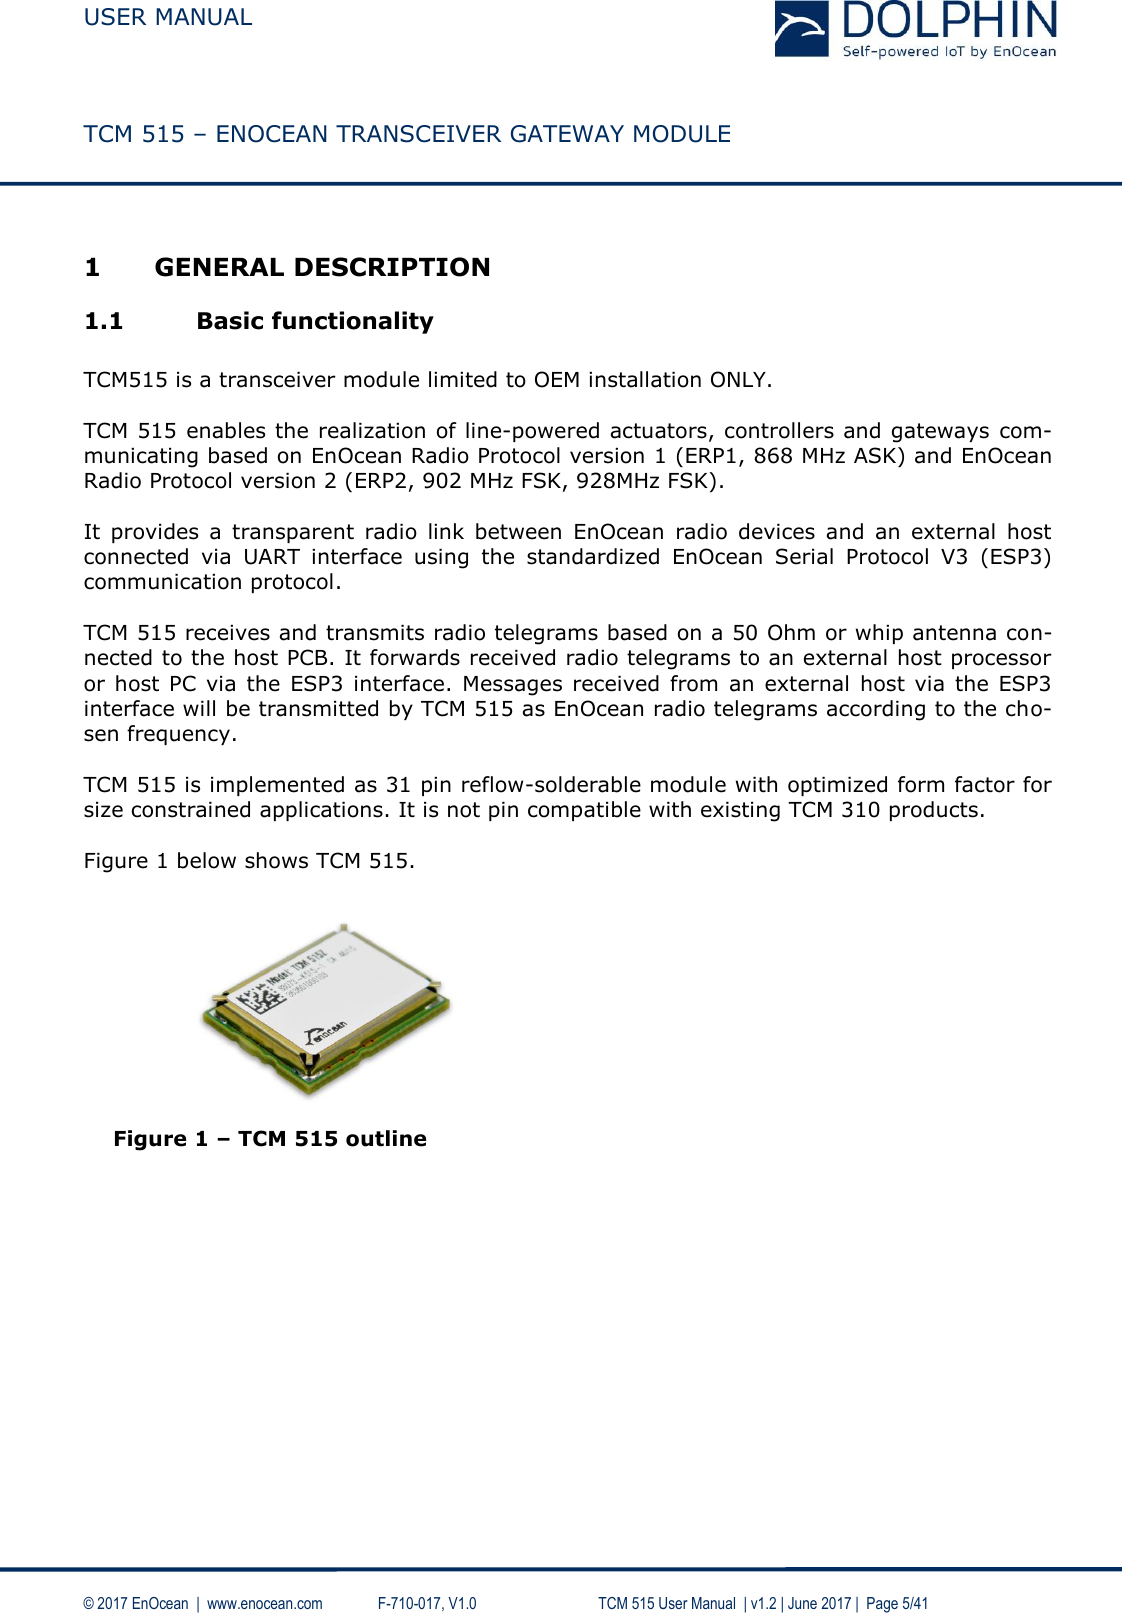  USER MANUAL    TCM 515 – ENOCEAN TRANSCEIVER GATEWAY MODULE  © 2017 EnOcean  |  www.enocean.com   F-710-017, V1.0        TCM 515 User Manual  | v1.2 | June 2017 |  Page 5/41  1 GENERAL DESCRIPTION 1.1 Basic functionality  TCM515 is a transceiver module limited to OEM installation ONLY.  TCM 515 enables the realization of line-powered actuators, controllers and gateways com-municating based on EnOcean Radio Protocol version 1 (ERP1, 868 MHz ASK) and EnOcean Radio Protocol version 2 (ERP2, 902 MHz FSK, 928MHz FSK).   It  provides  a  transparent  radio  link  between  EnOcean  radio  devices  and  an  external  host connected  via  UART  interface  using  the  standardized  EnOcean  Serial  Protocol  V3  (ESP3) communication protocol.  TCM 515 receives and transmits radio telegrams based on a 50 Ohm or whip antenna con-nected to the host PCB. It forwards received radio telegrams to an external host processor or host PC  via  the  ESP3  interface. Messages received from  an  external host  via  the ESP3 interface will be transmitted by TCM 515 as EnOcean radio telegrams according to the cho-sen frequency.  TCM 515 is implemented as 31 pin reflow-solderable module with optimized form factor for size constrained applications. It is not pin compatible with existing TCM 310 products.  Figure 1 below shows TCM 515.           Figure 1 – TCM 515 outline   